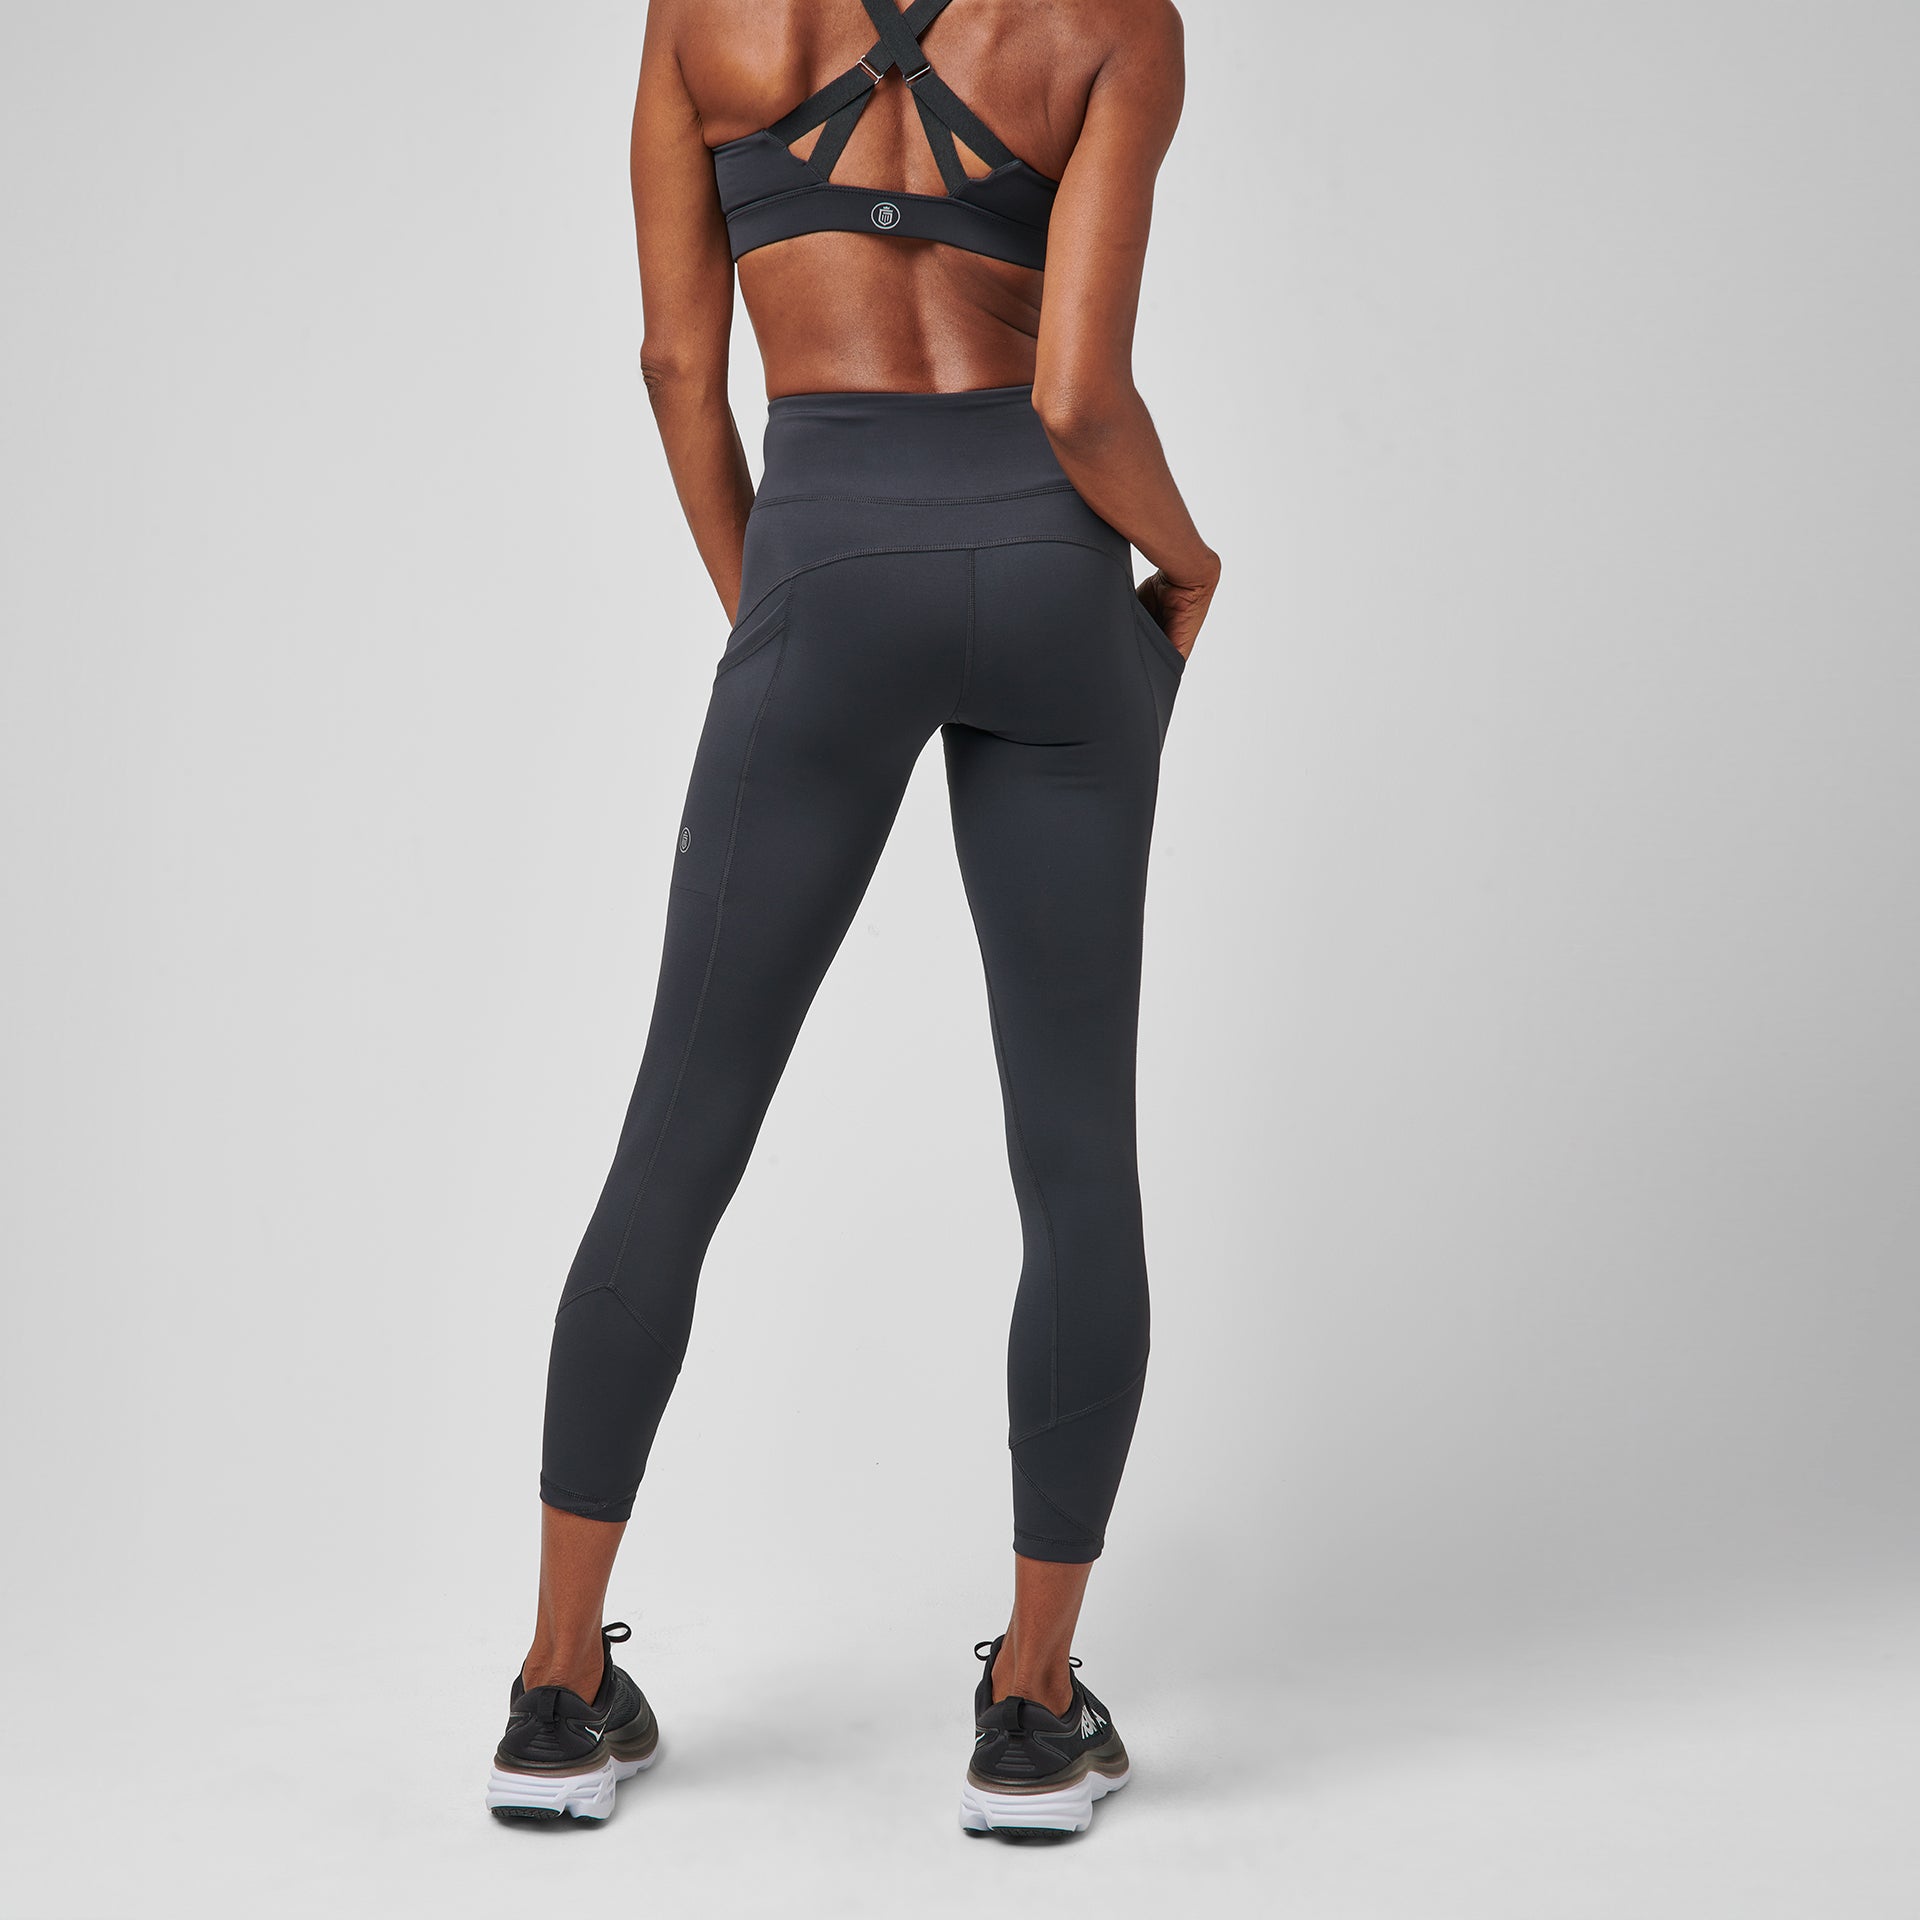 HIGH OUTPUT SPORTS LEGGING Black – Greatness Wins